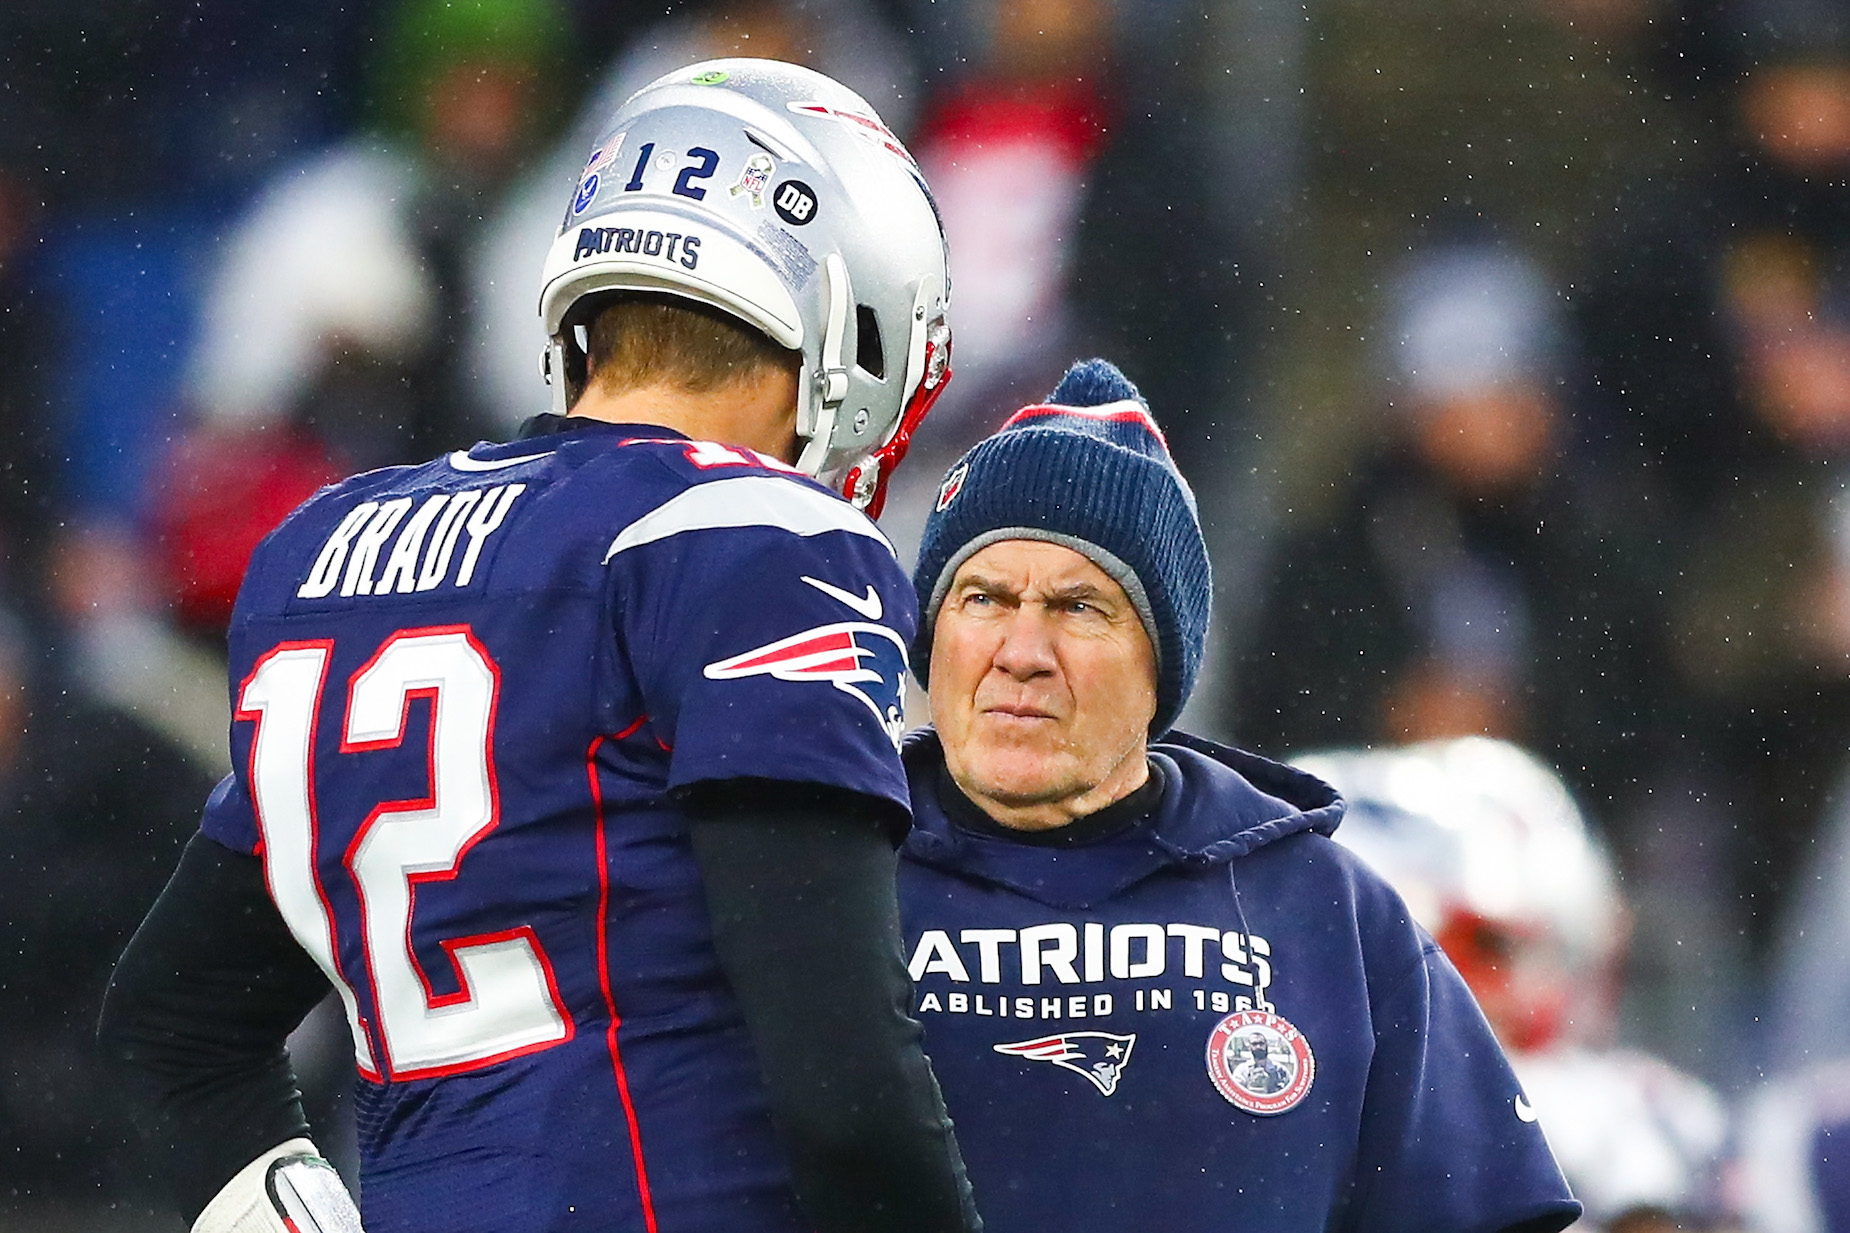 While Tom Brady and Bill Belichick teamed up to win six Super Bowl titles, the coach wasn't afraid to call out his quarterback behind the scenes.